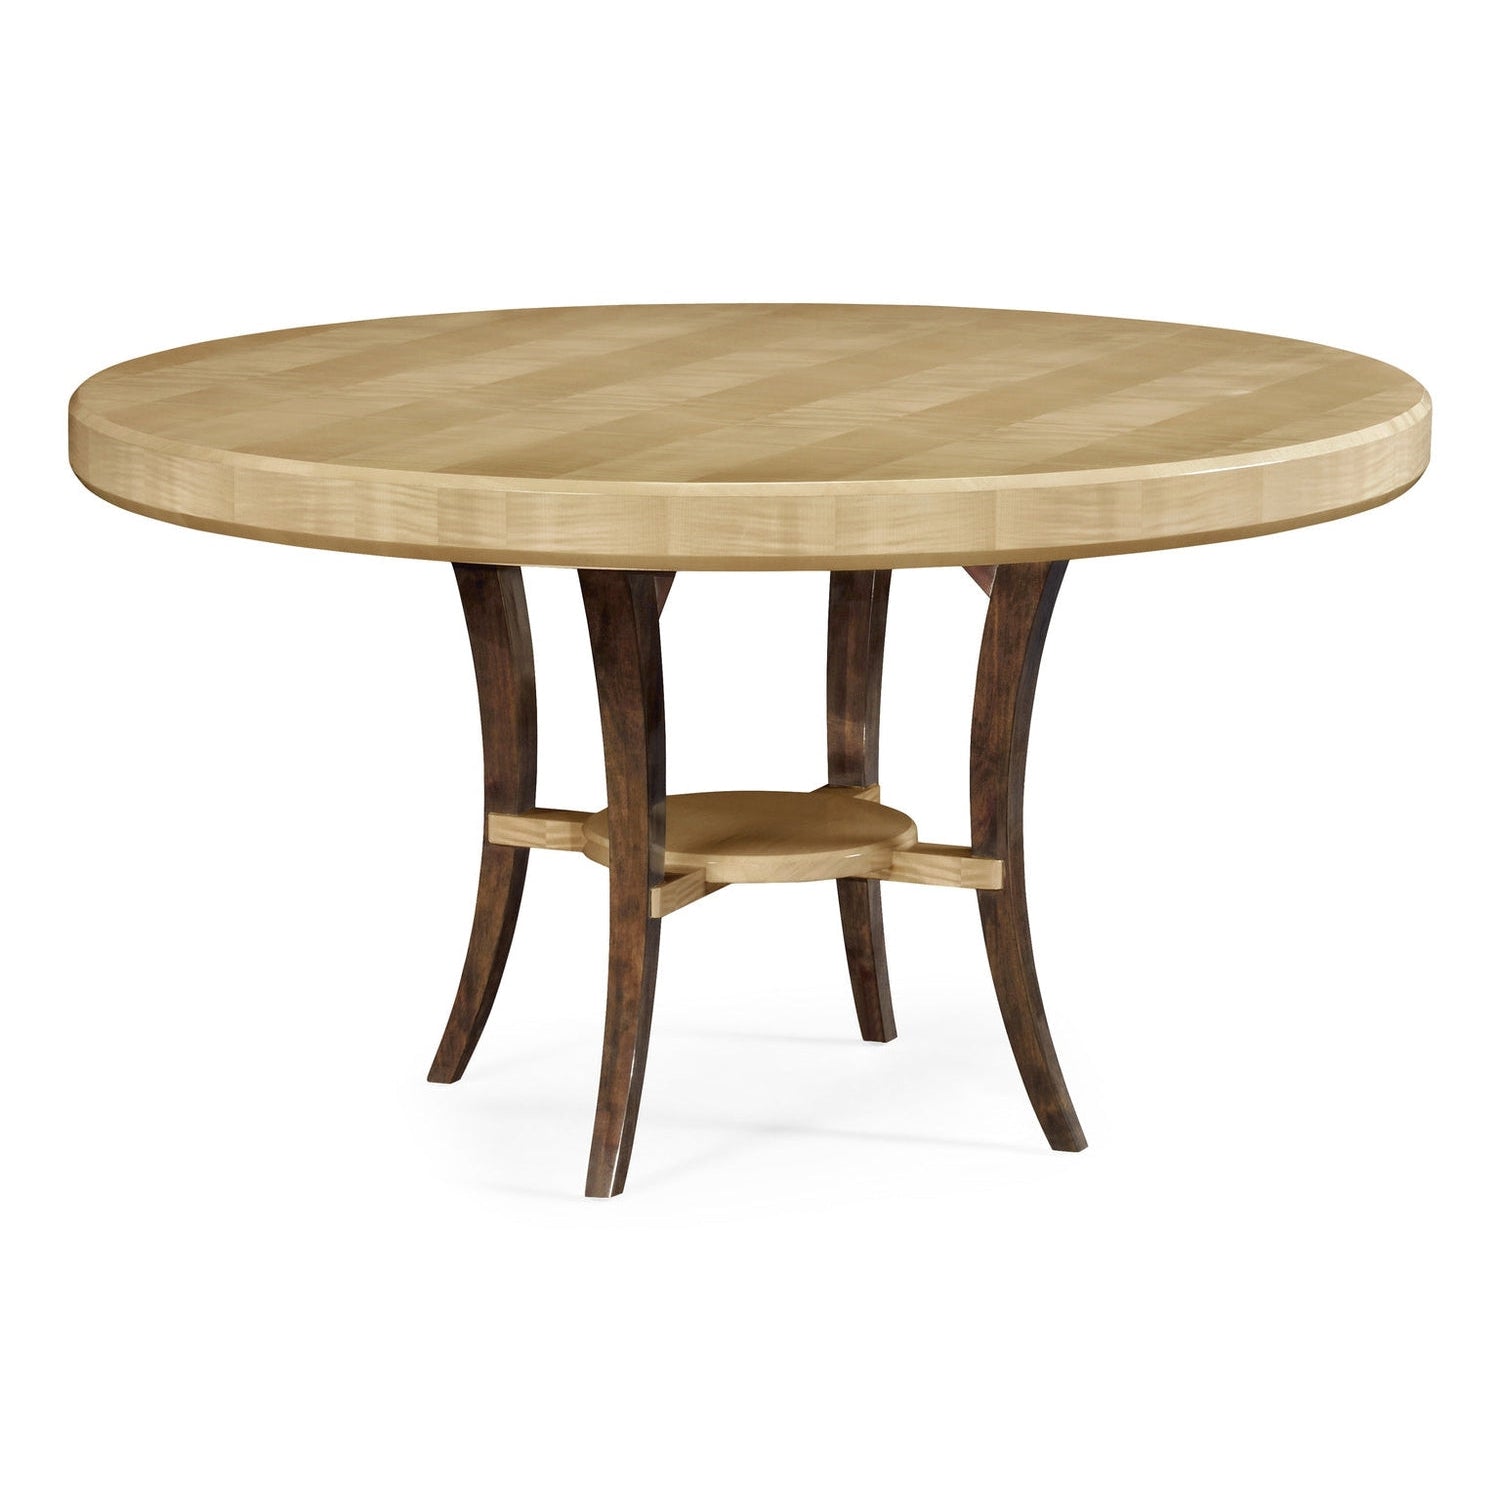 Jonathan Charles, 54" Art Deco Round Dining Table